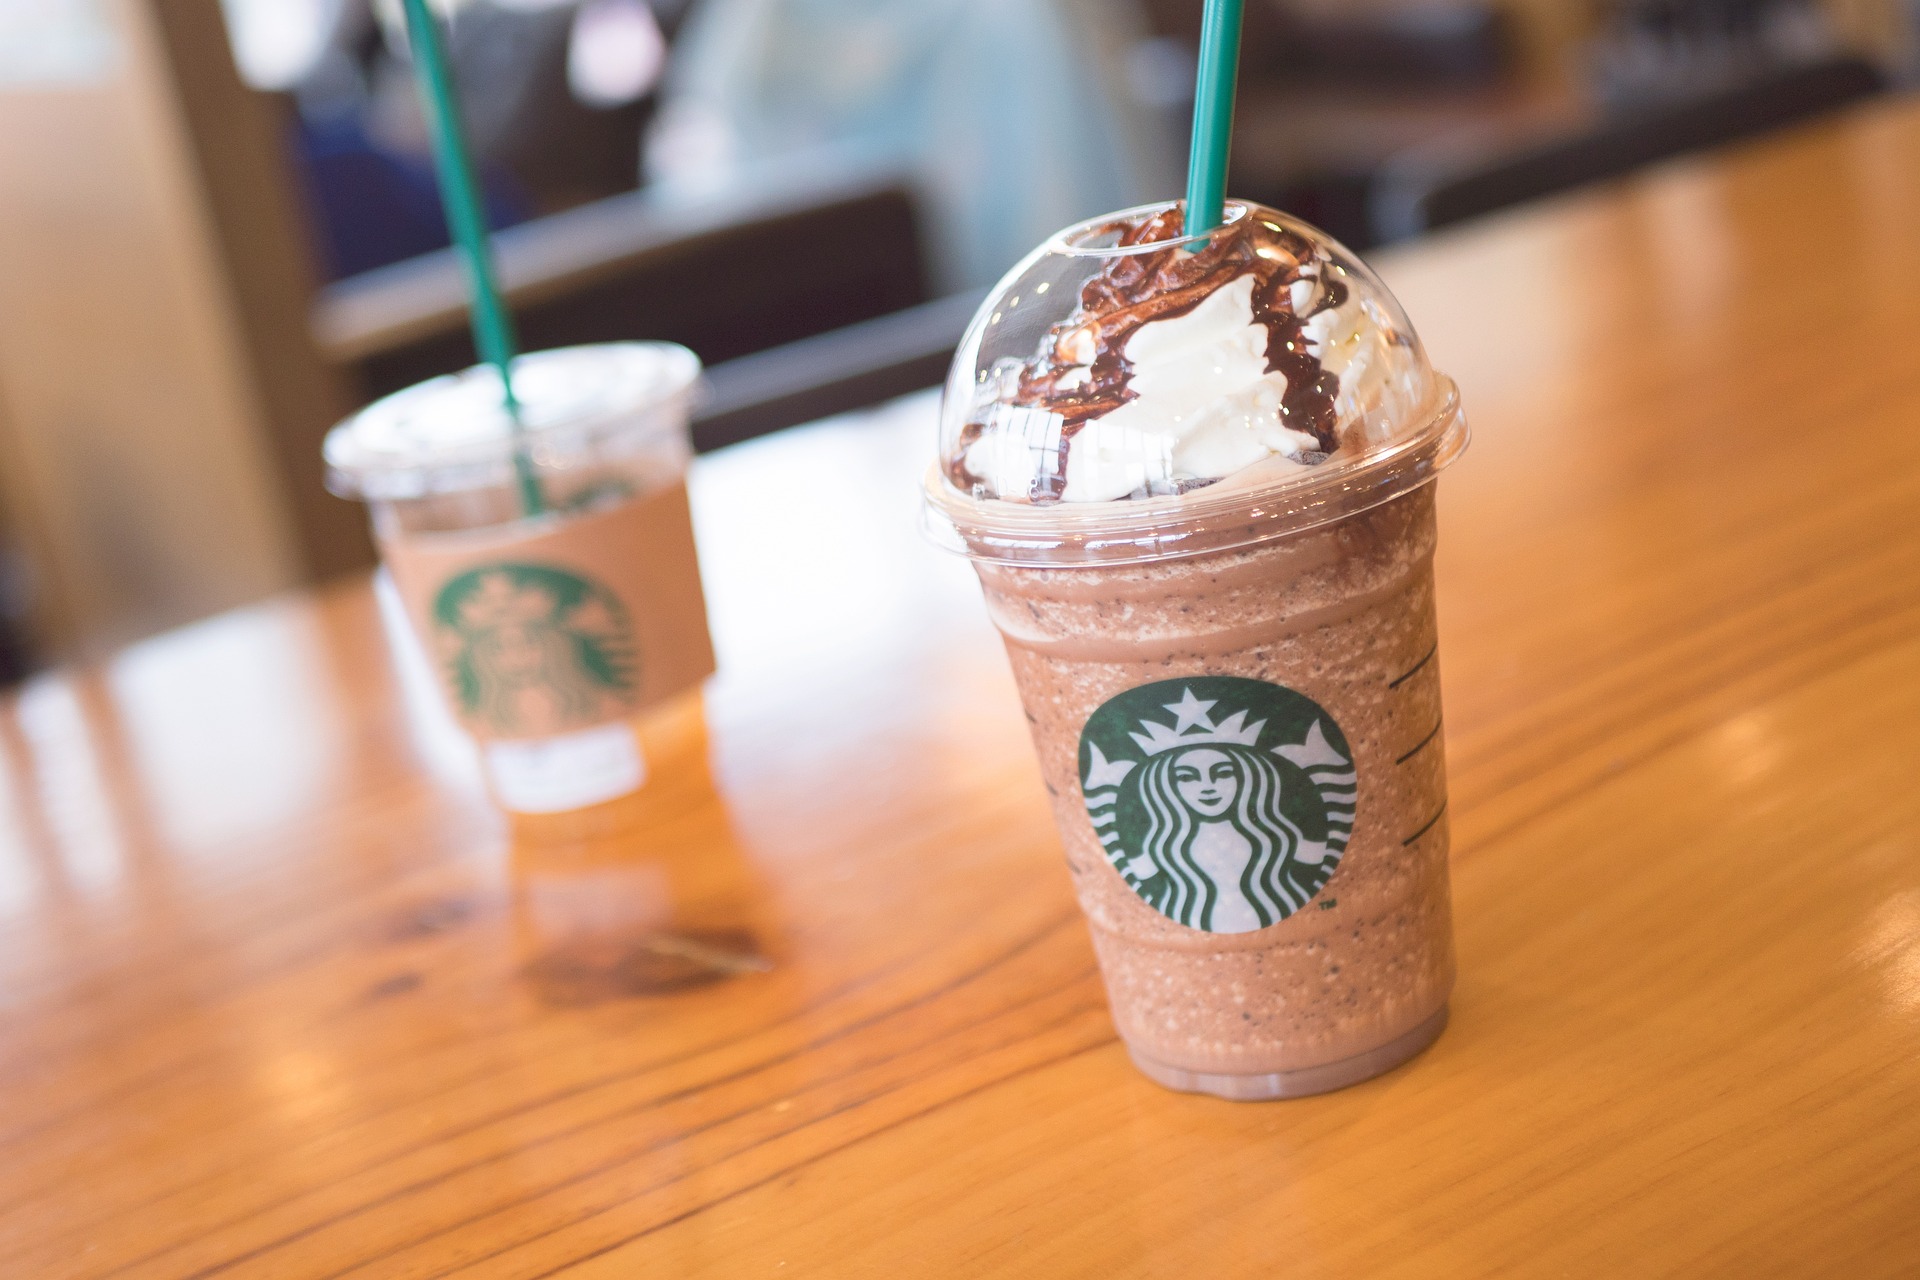 How To Order At Starbucks Like A Pro